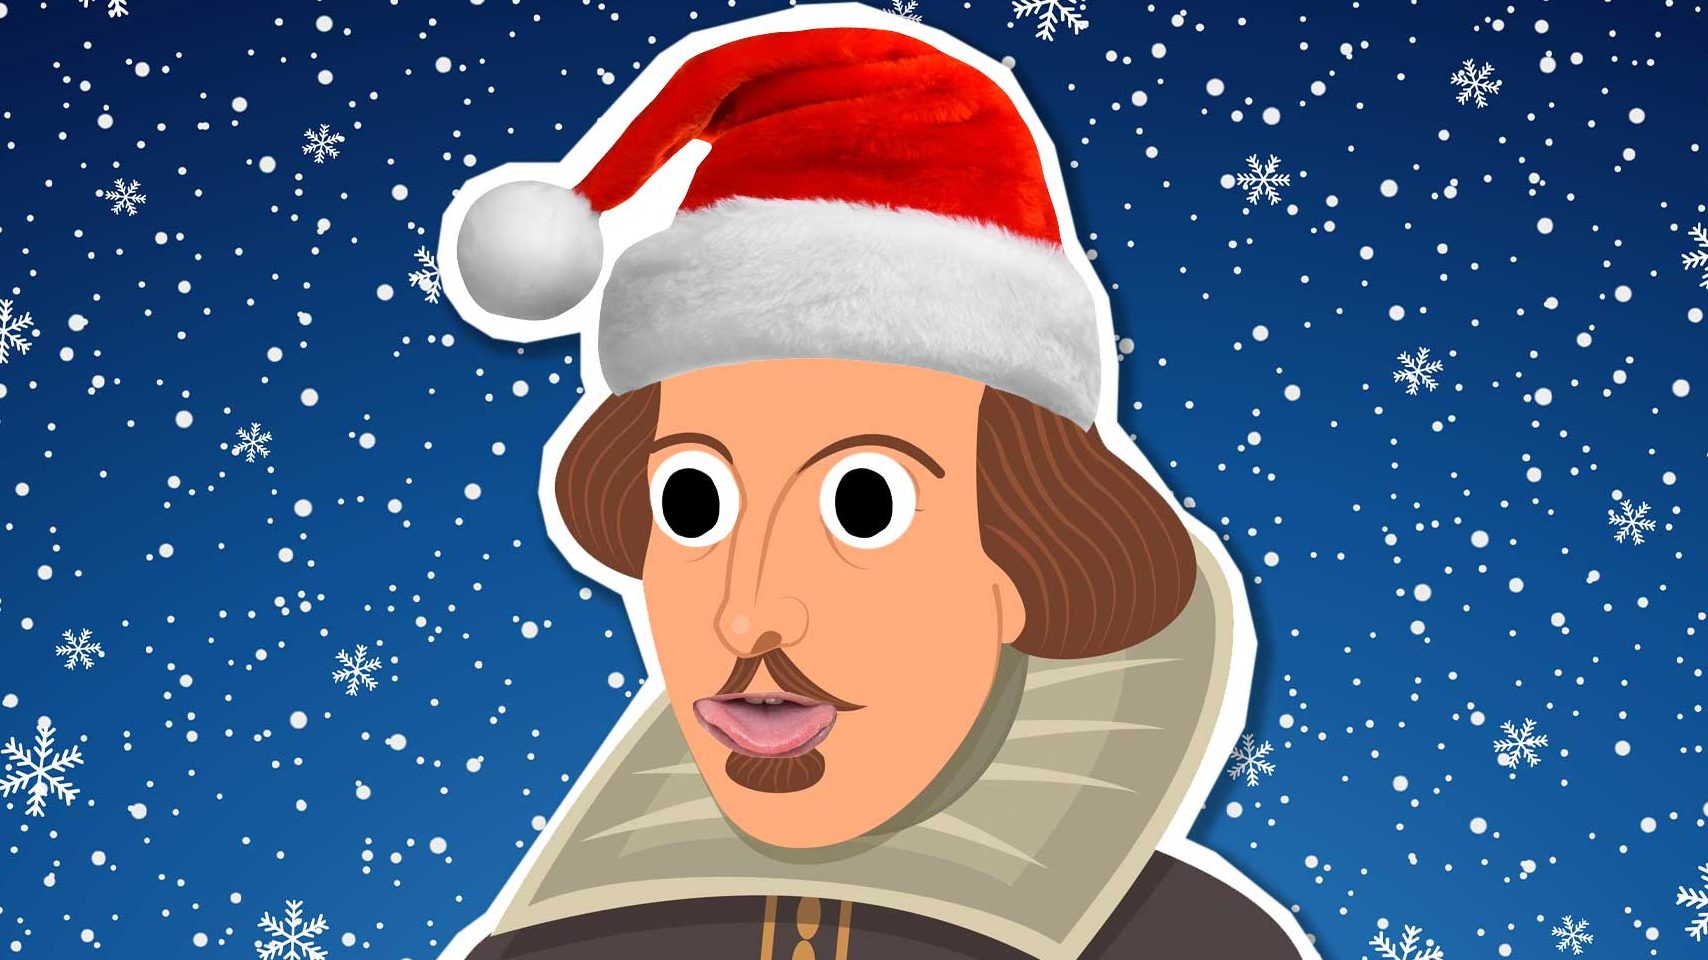 Shakespeare at Christmas